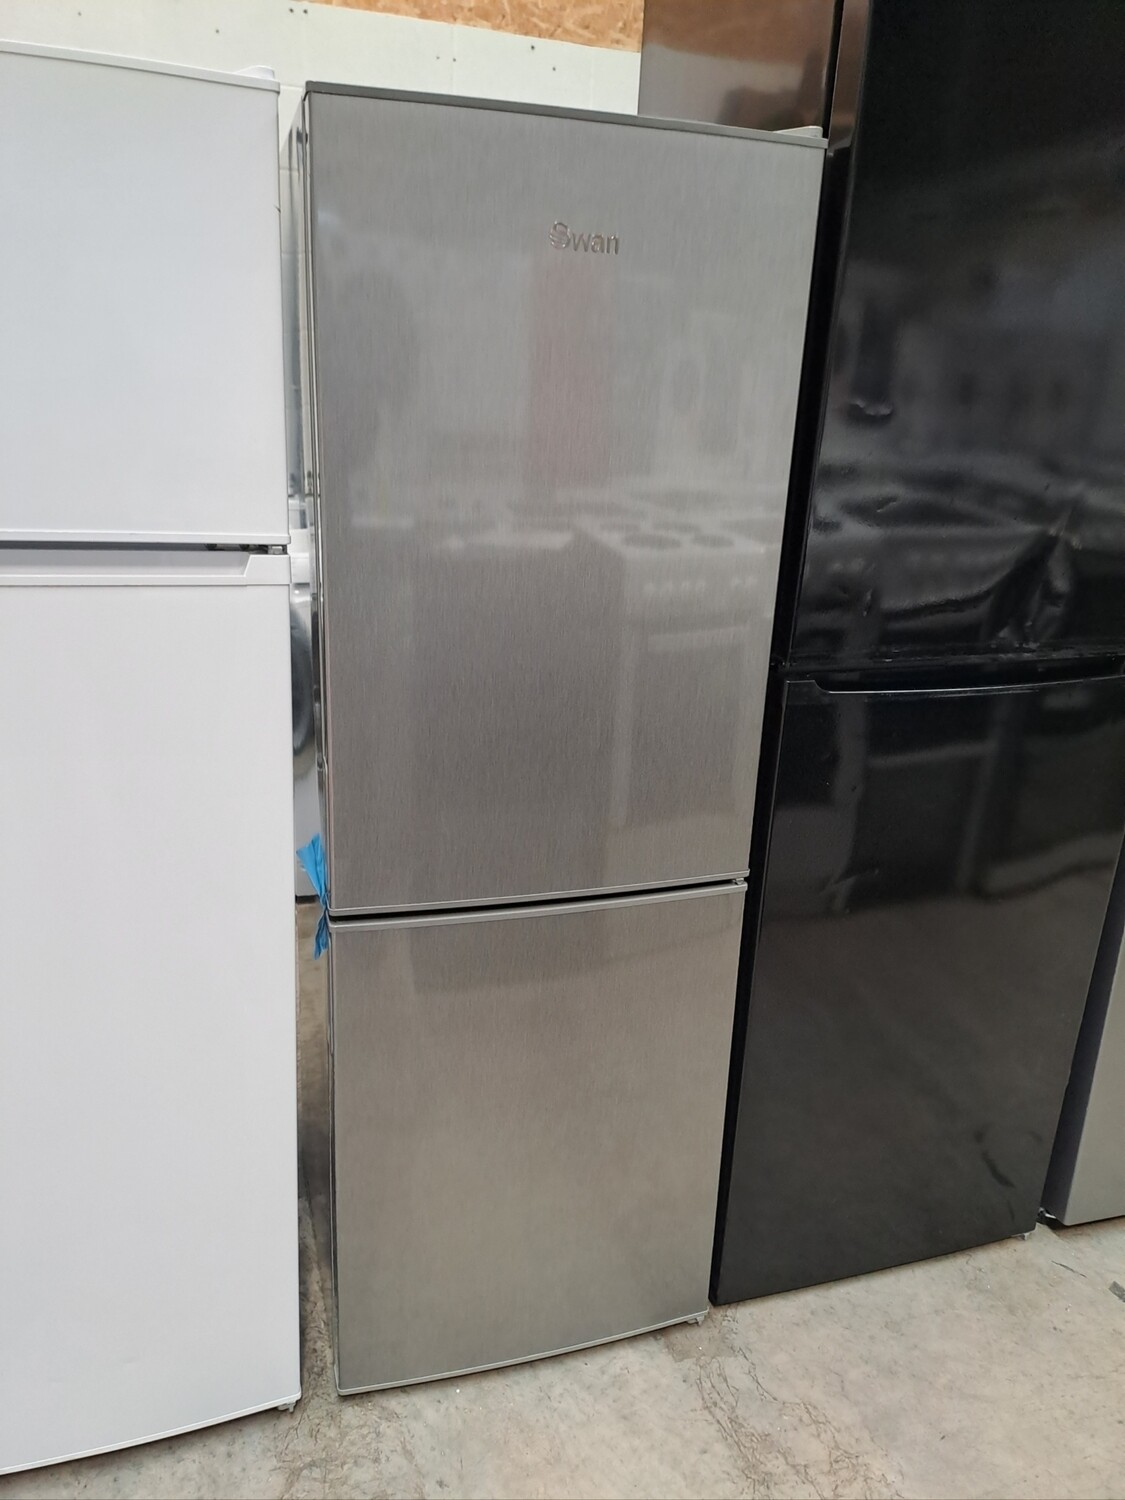 Swan SR15880S Fridge Freezer Silver H145 x W50 X D57 Brand New (located in Whitby Road shop)